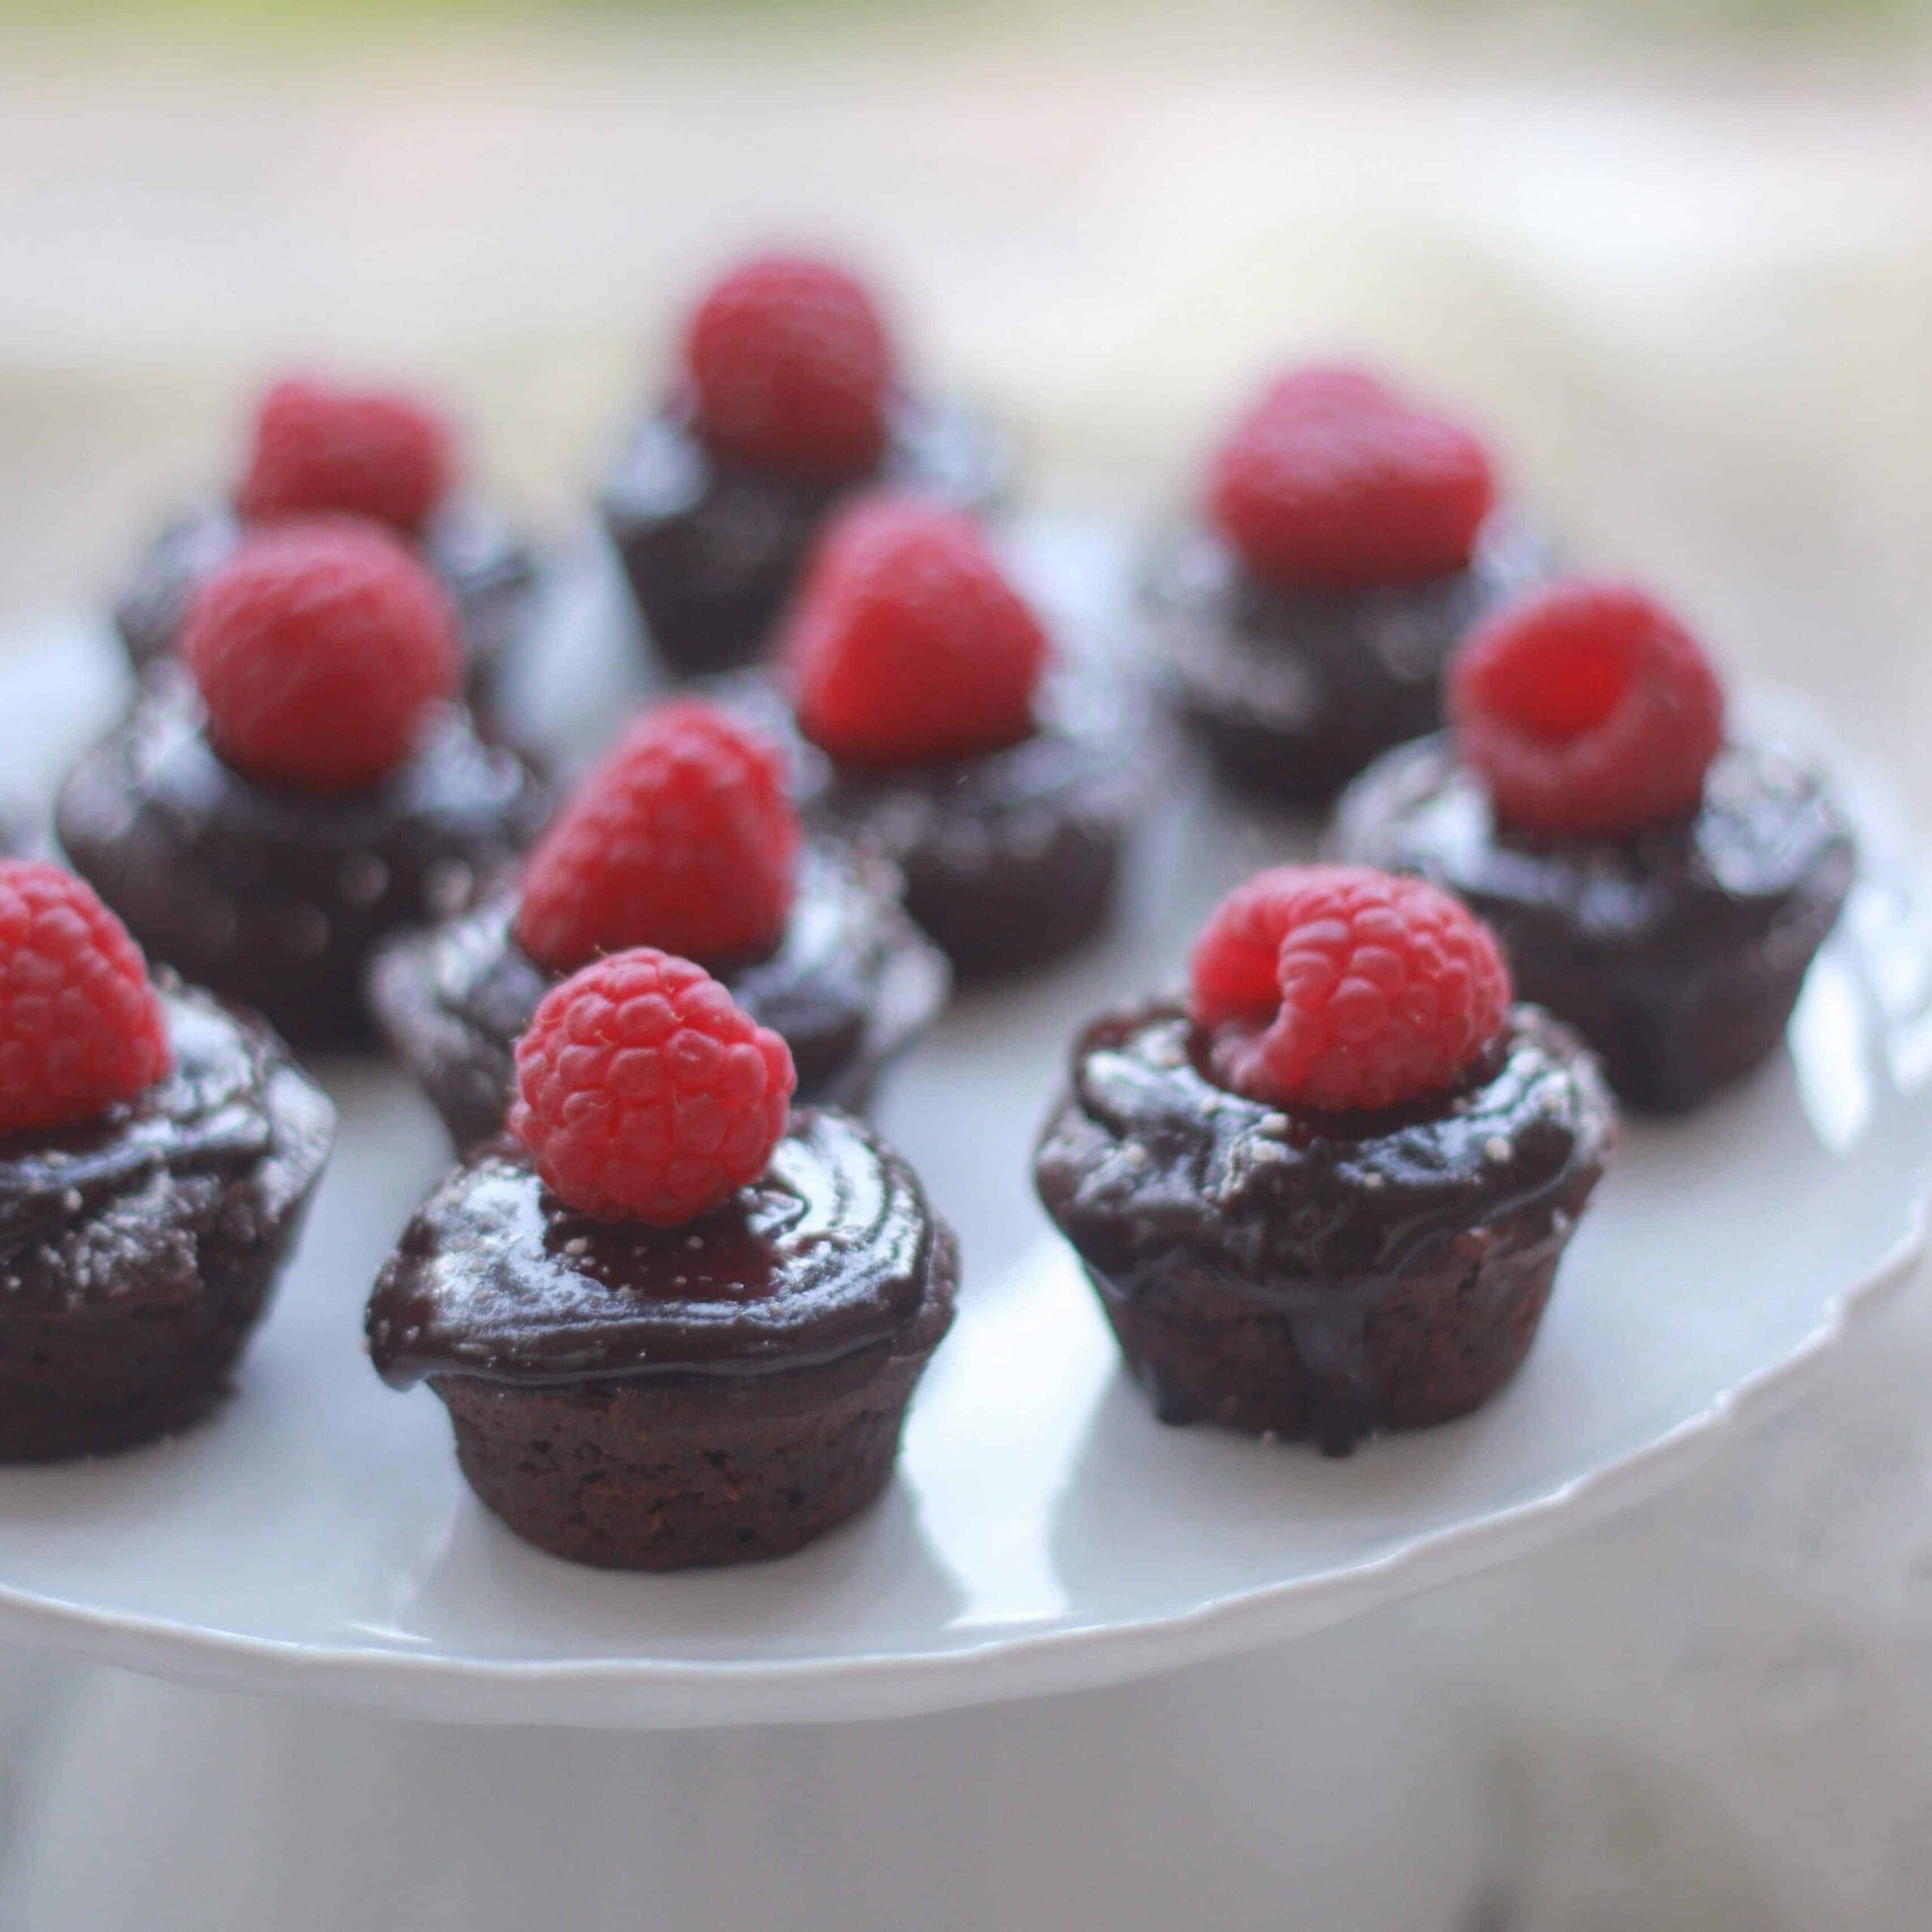 Mini Flourless Chocolate Tortes with a raspberry on top of each on a cake stand